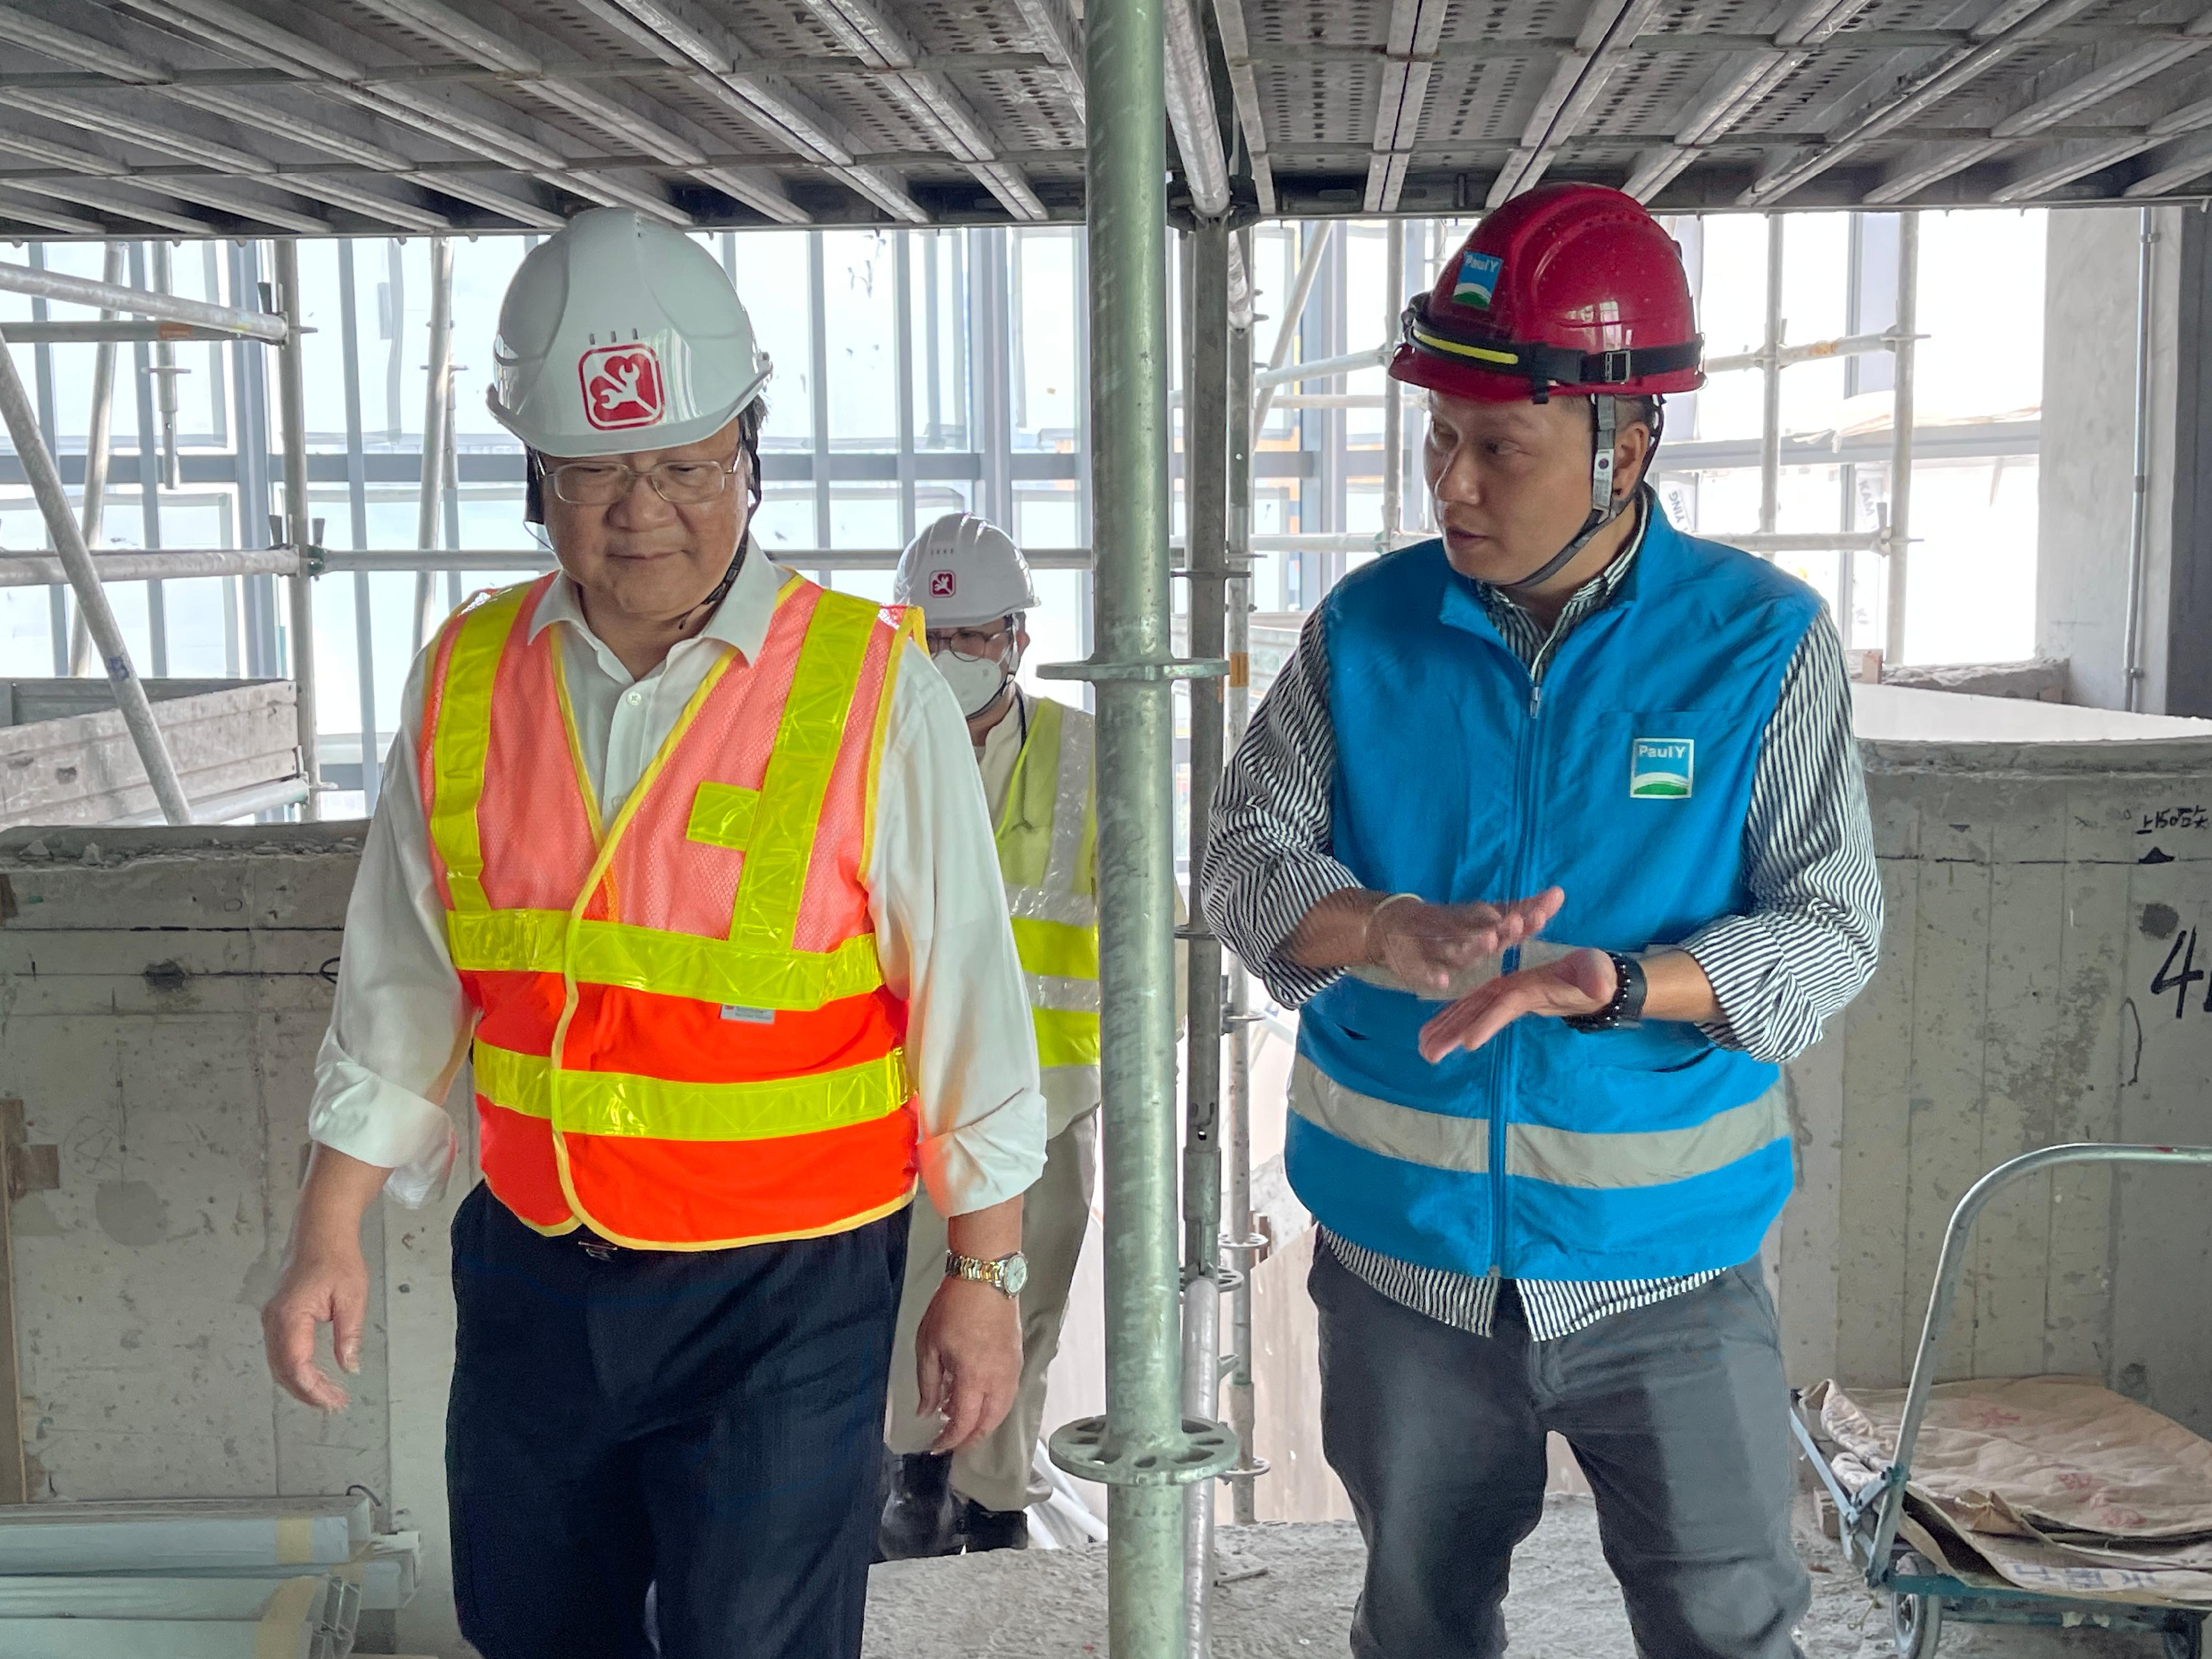 The works departments carried out surprise inspections in the past week, targeting high-risk processes in public works sites, in particular lifting operation and work at height to curb unsafe practices. The Director of Electrical and Mechanical Services, Mr Eric Pang (left), was inspecting a site of the public works under his charge. 